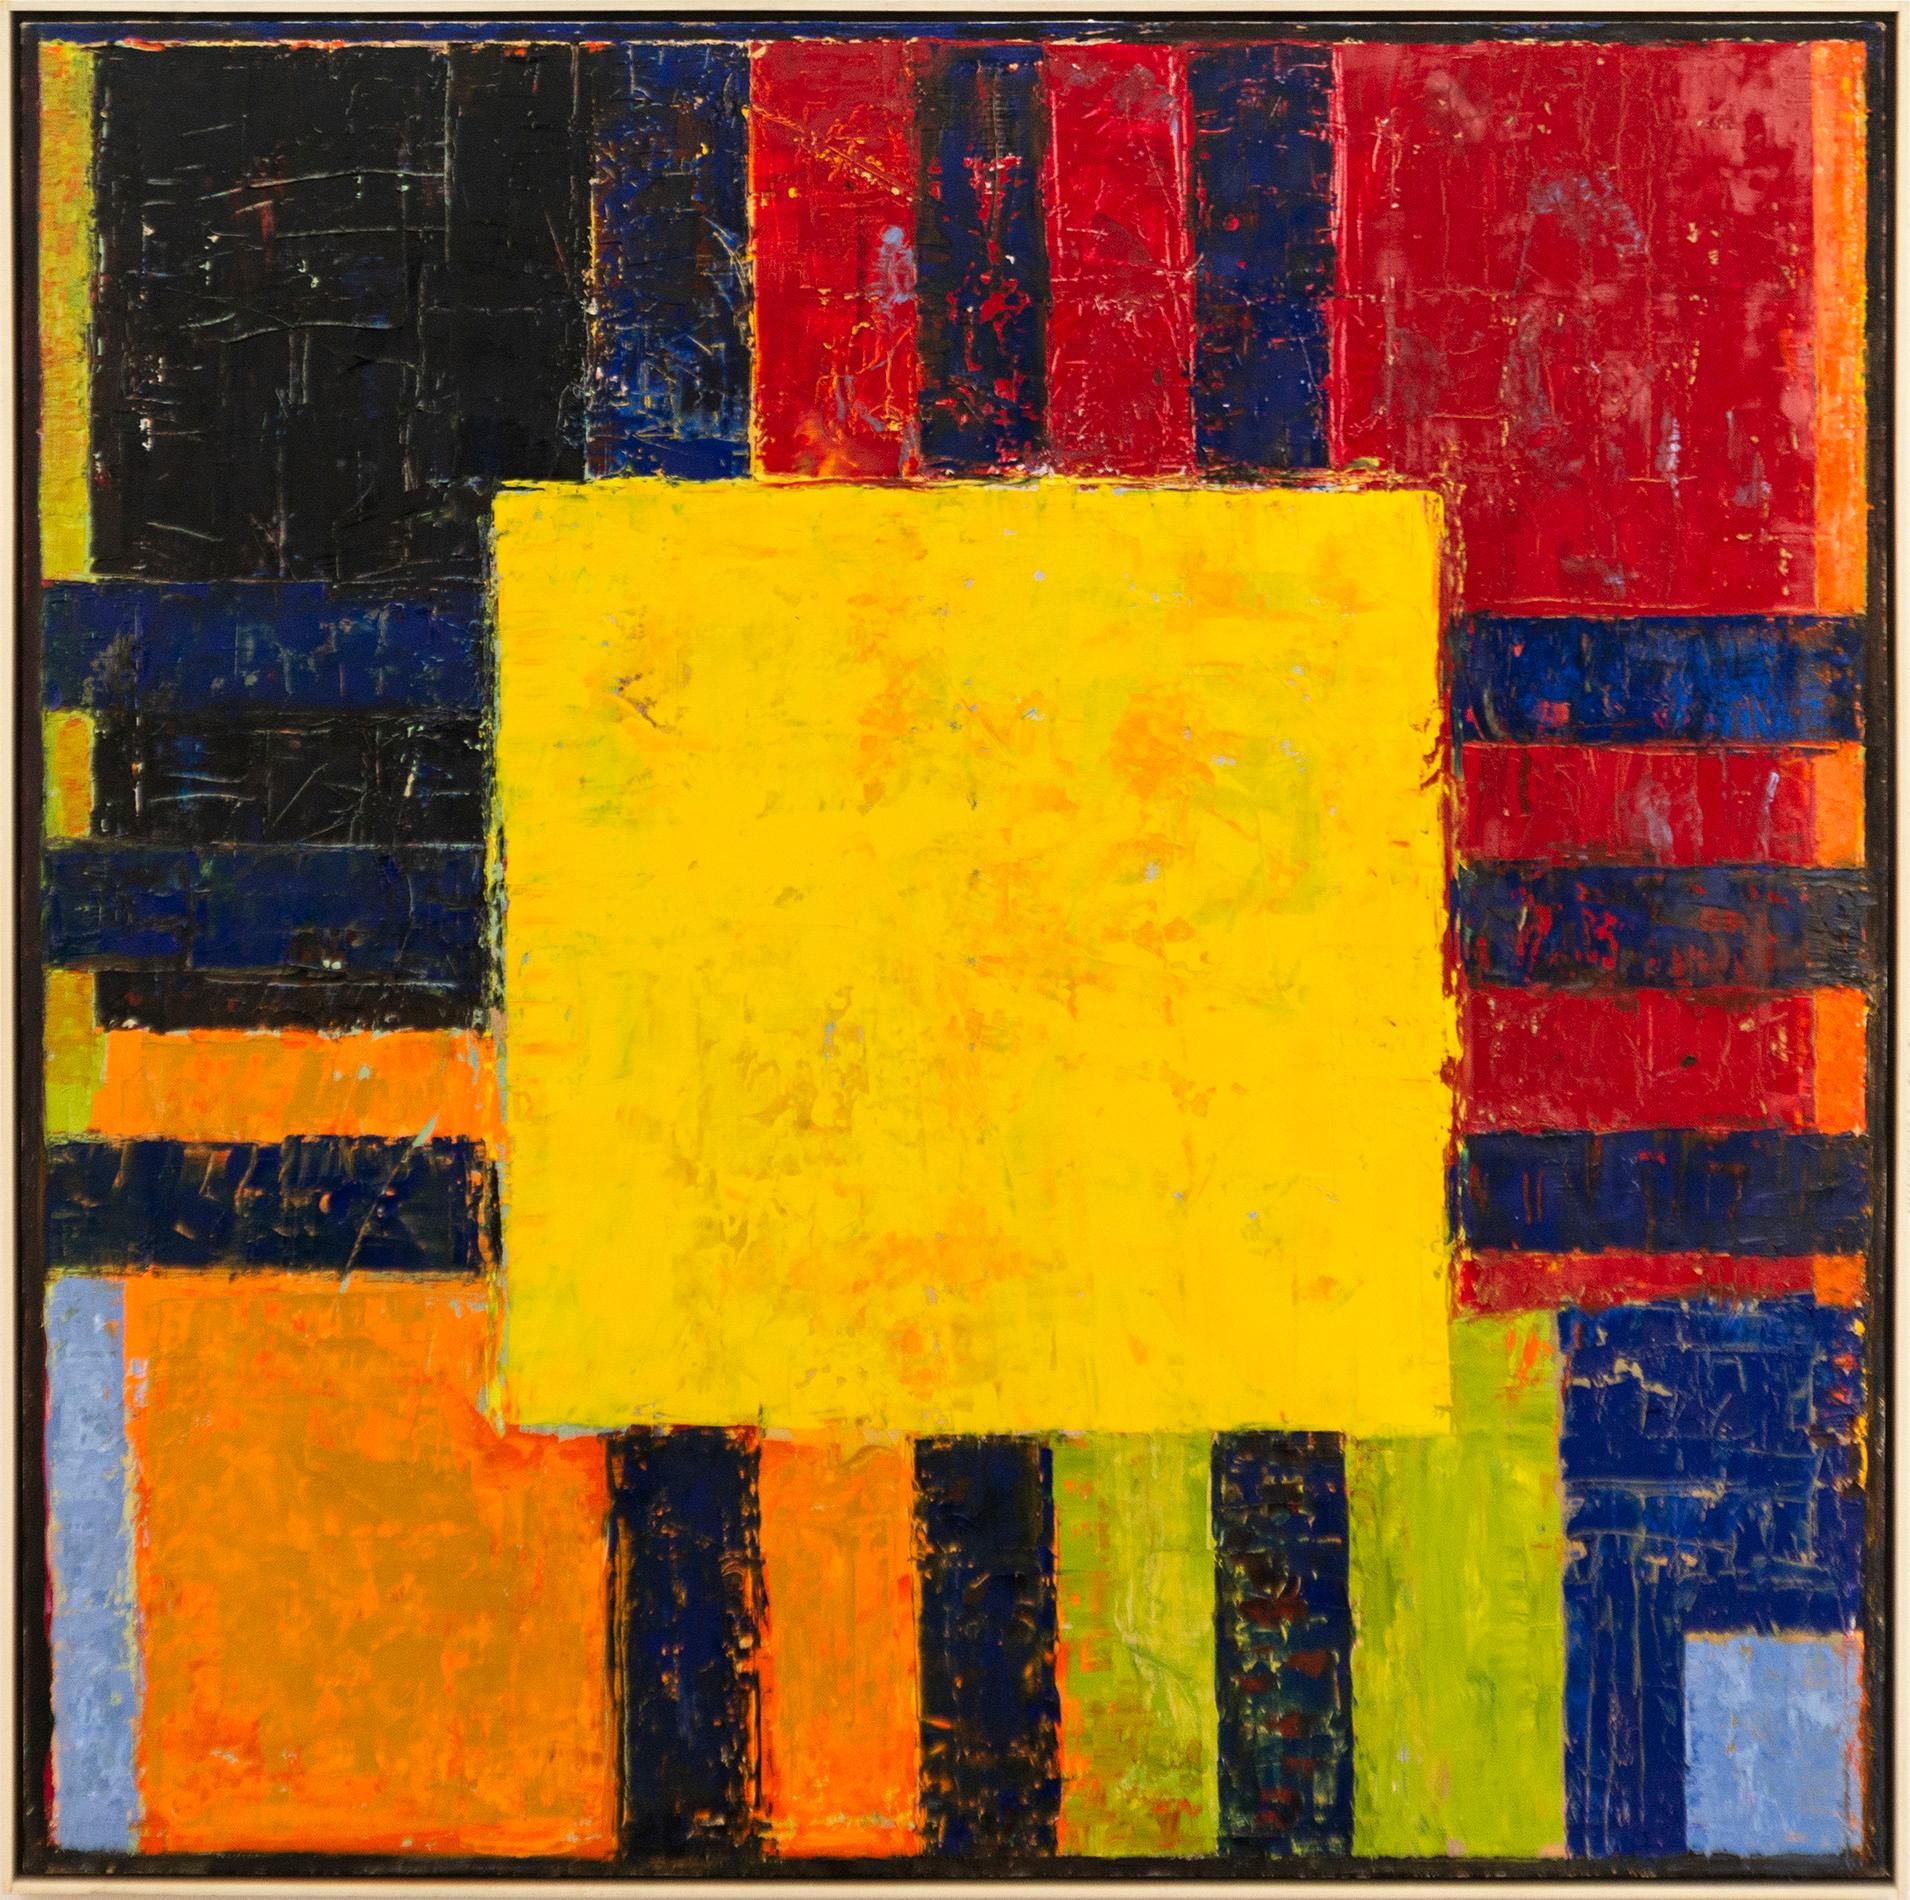 Havana No 4, Yellow - bold, bright, colorful, abstract, modernist, oil on canvas - Art by David Sorensen